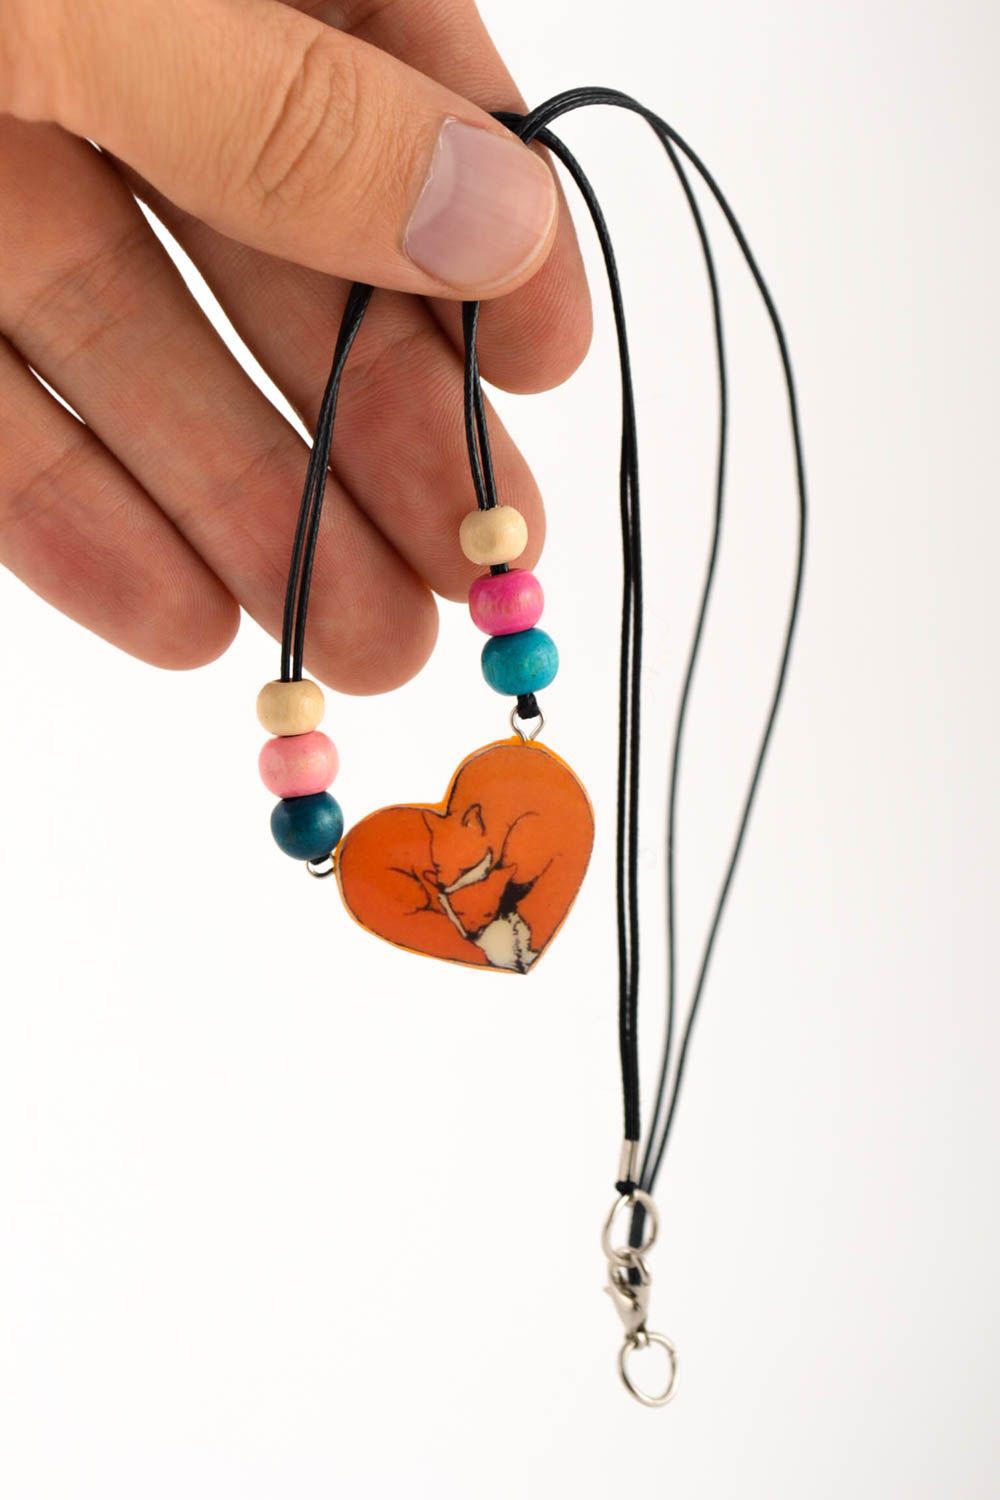 Handmade plastic pendant on cord fashion trends for girls polymer clay ideas photo 5